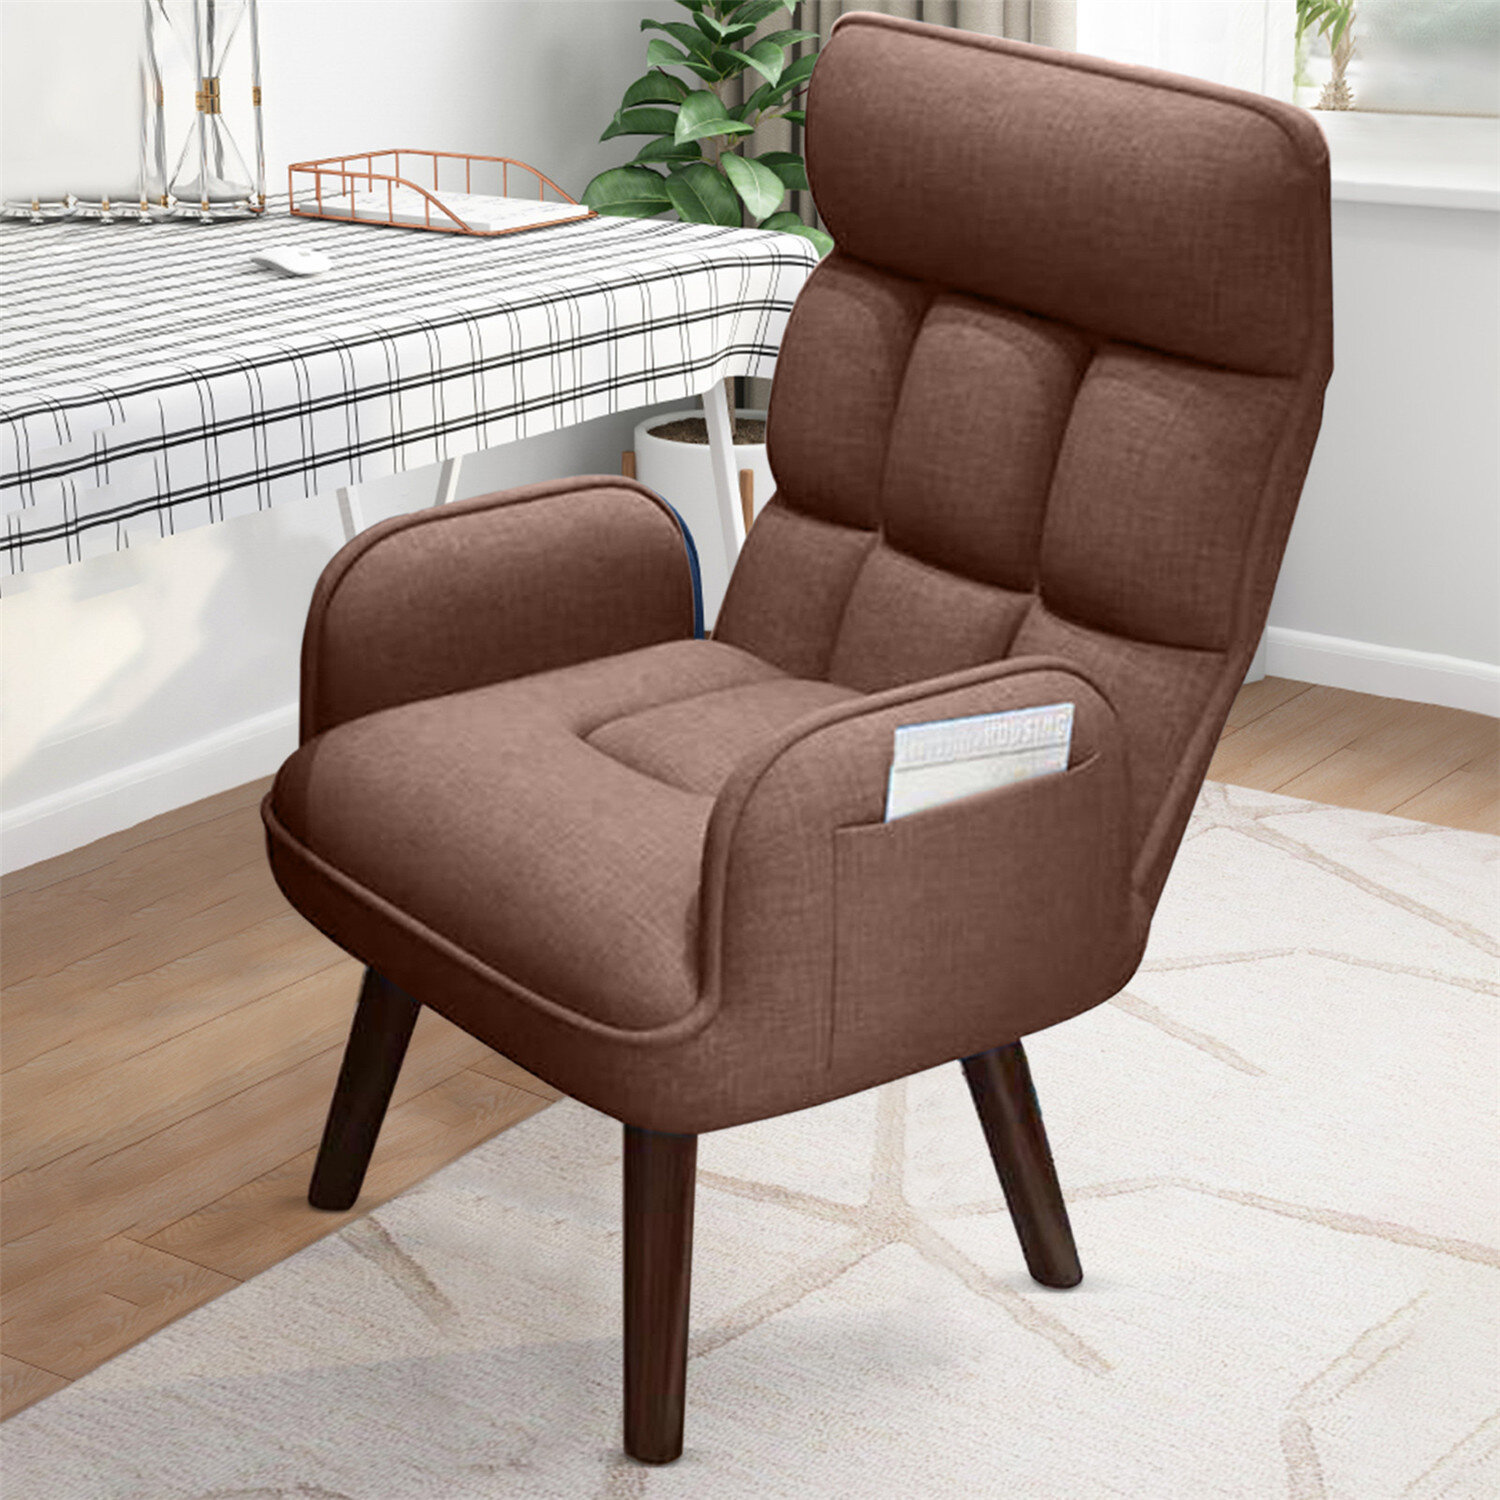 Details about   Single Sofa Chair Reclining Backrest Headrest Adjustable Angle Can Be Rotated 